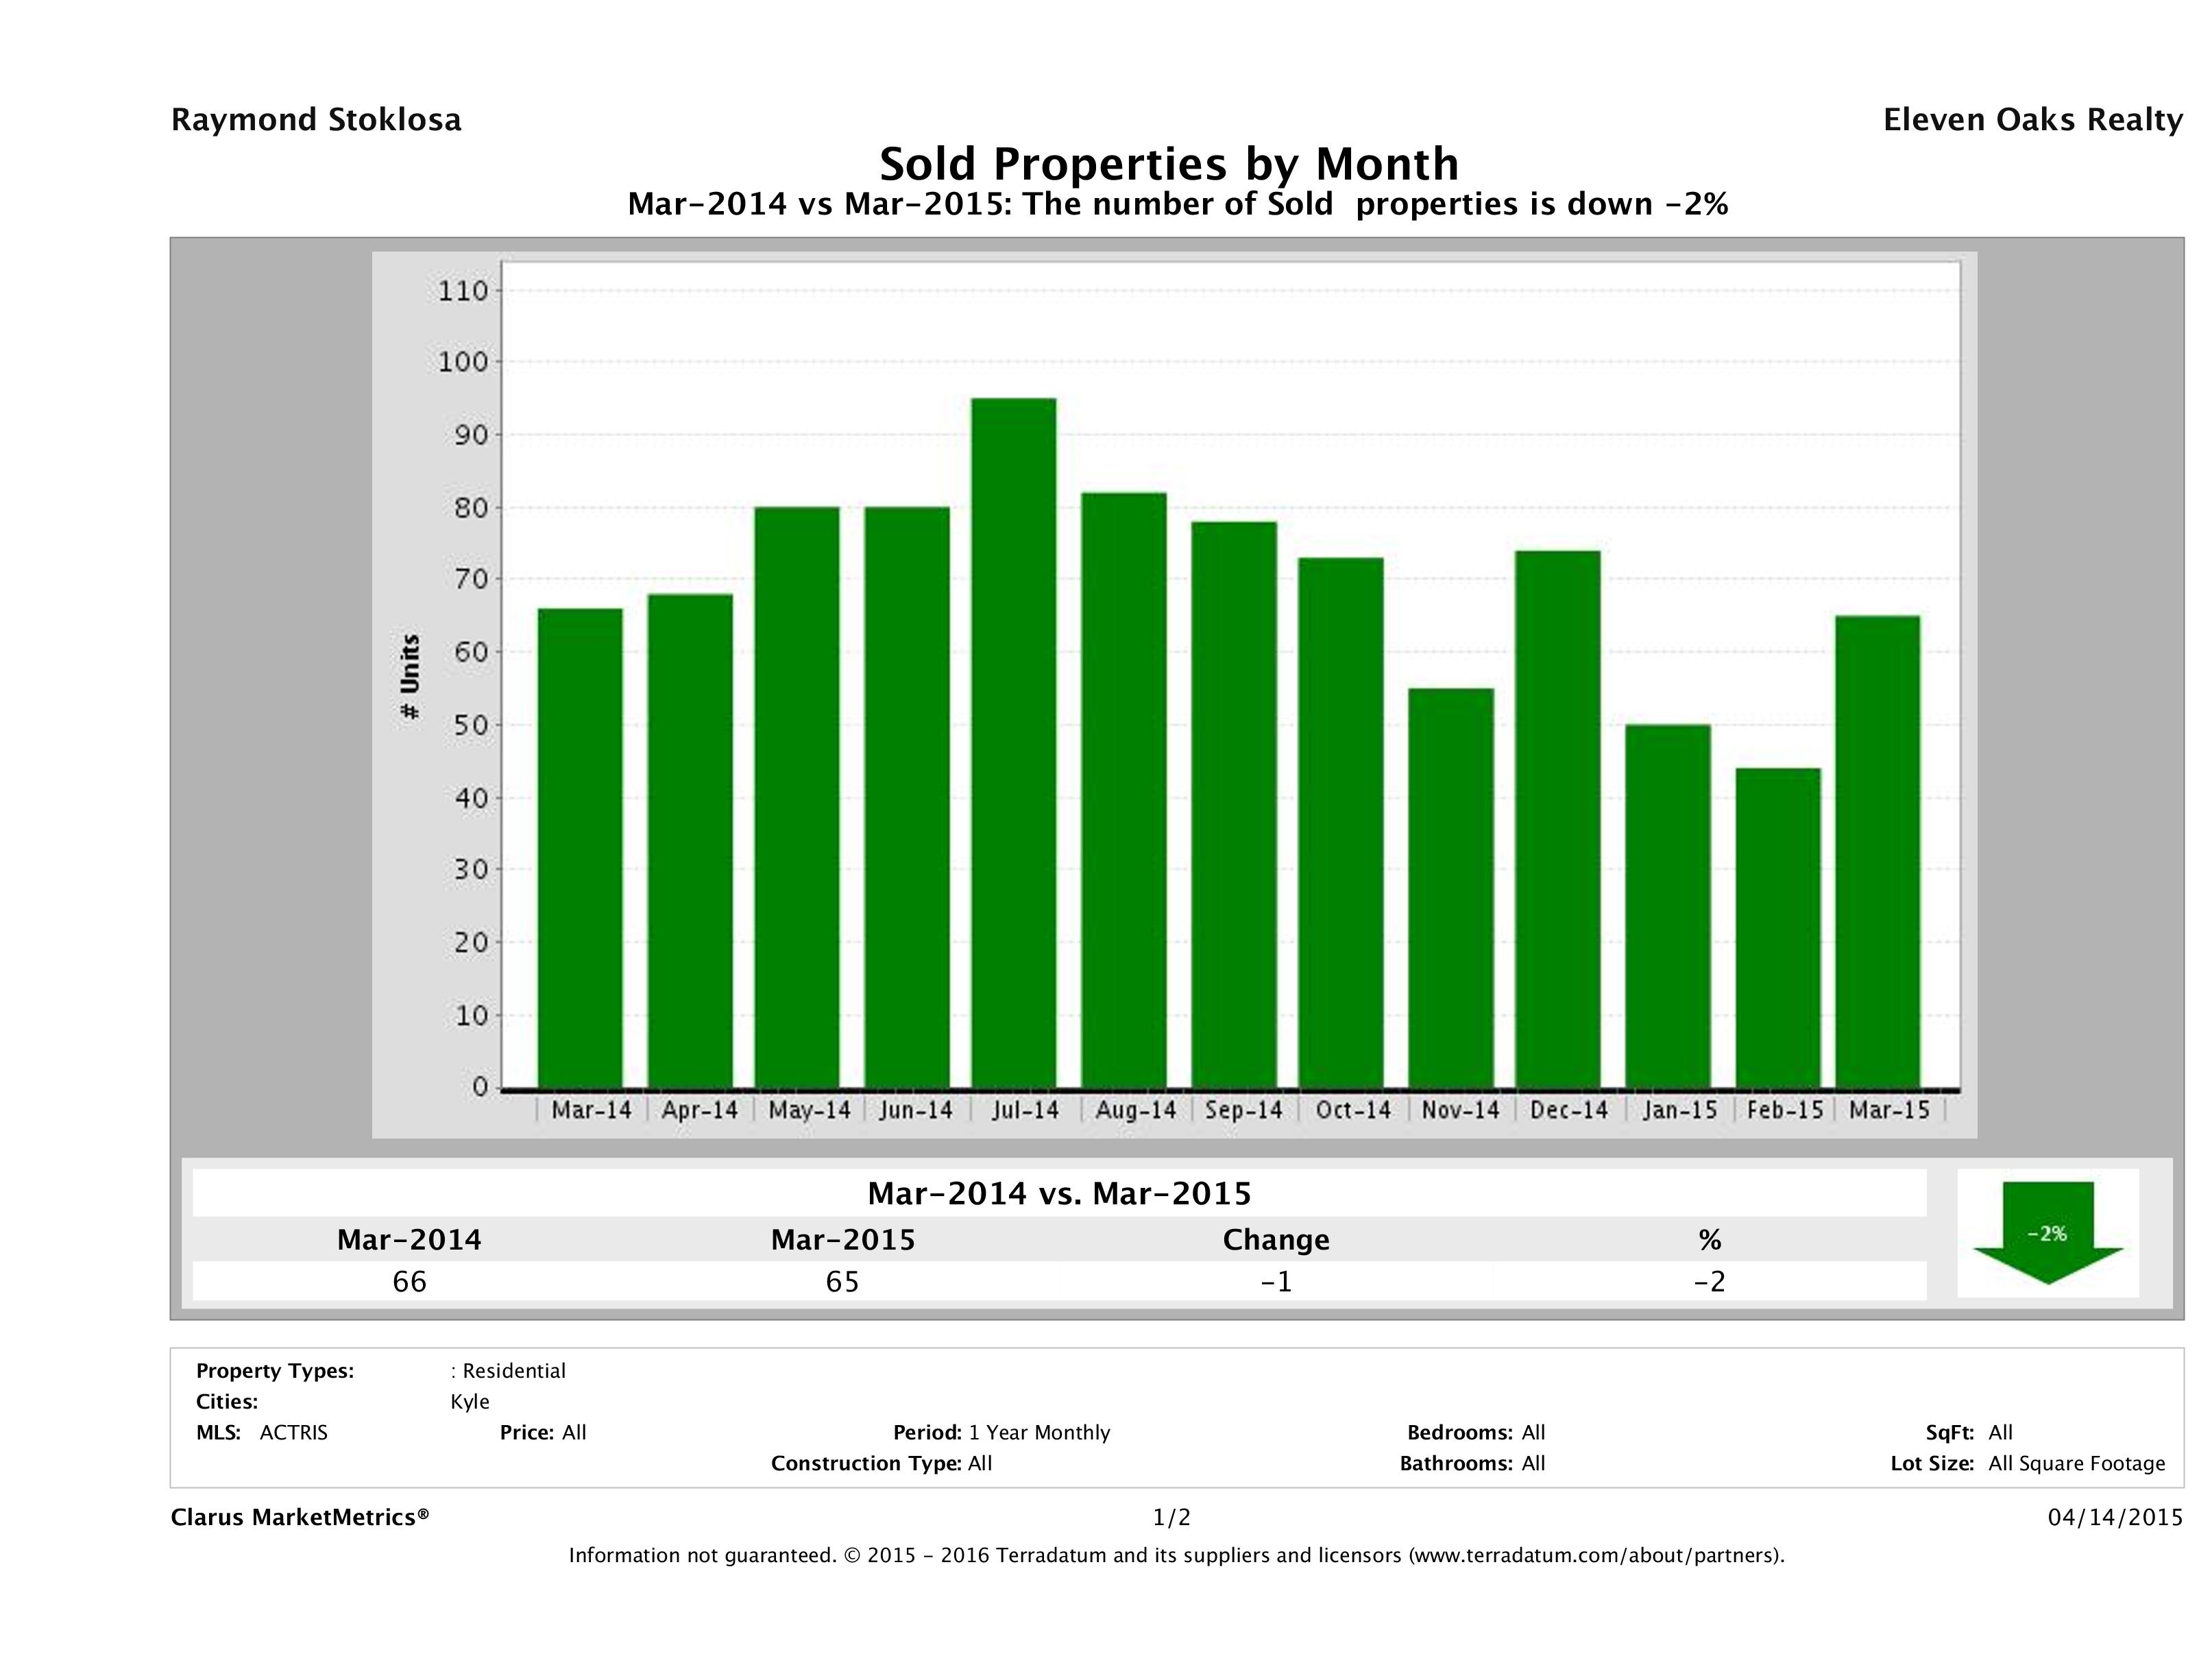 Kyle number of homes sold March 2015